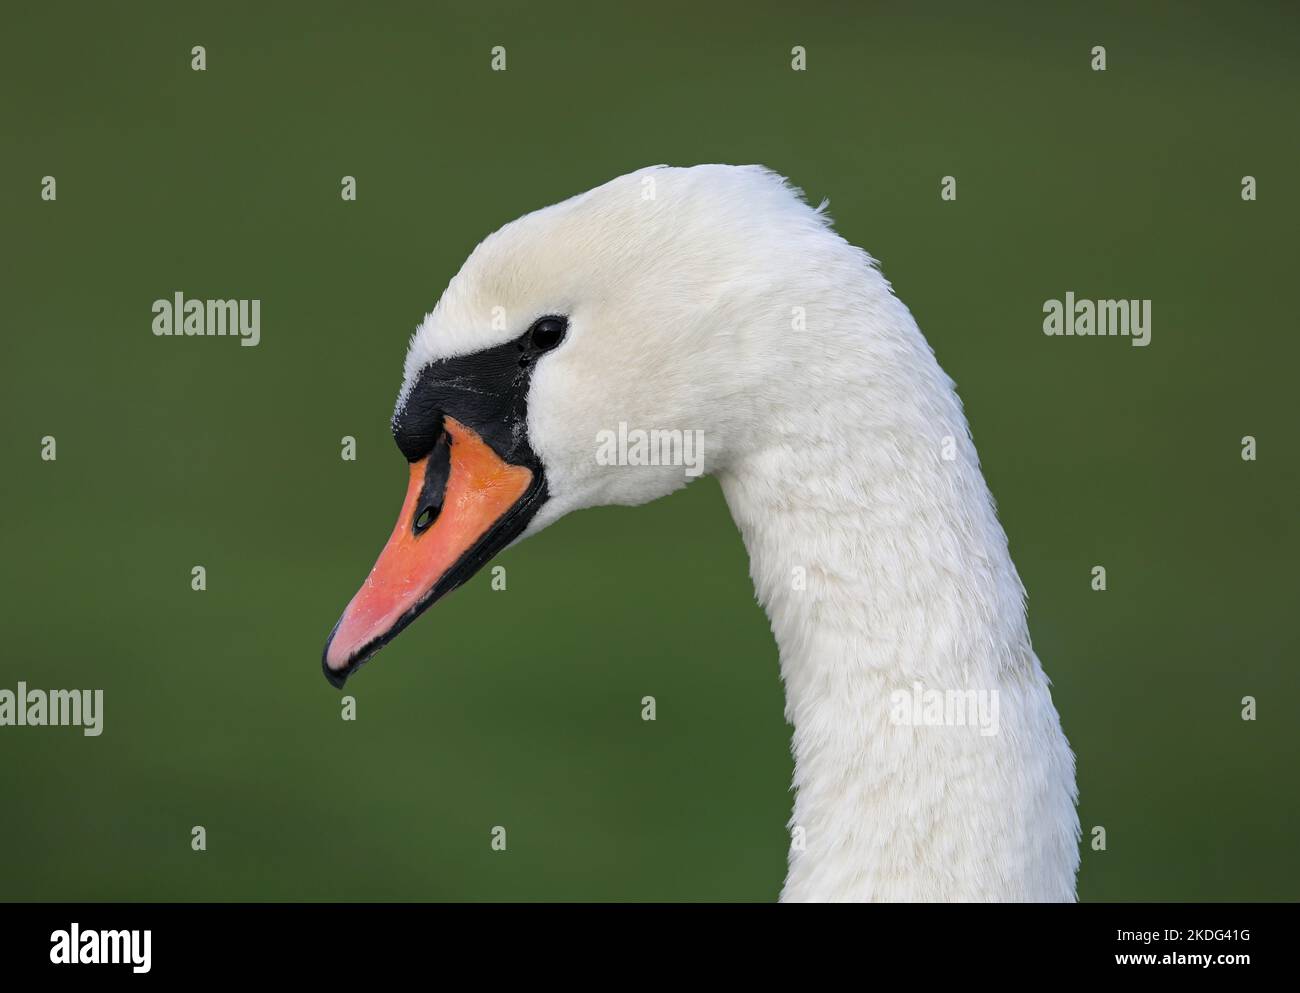 Swan head profile, isolated, green background Stock Photo